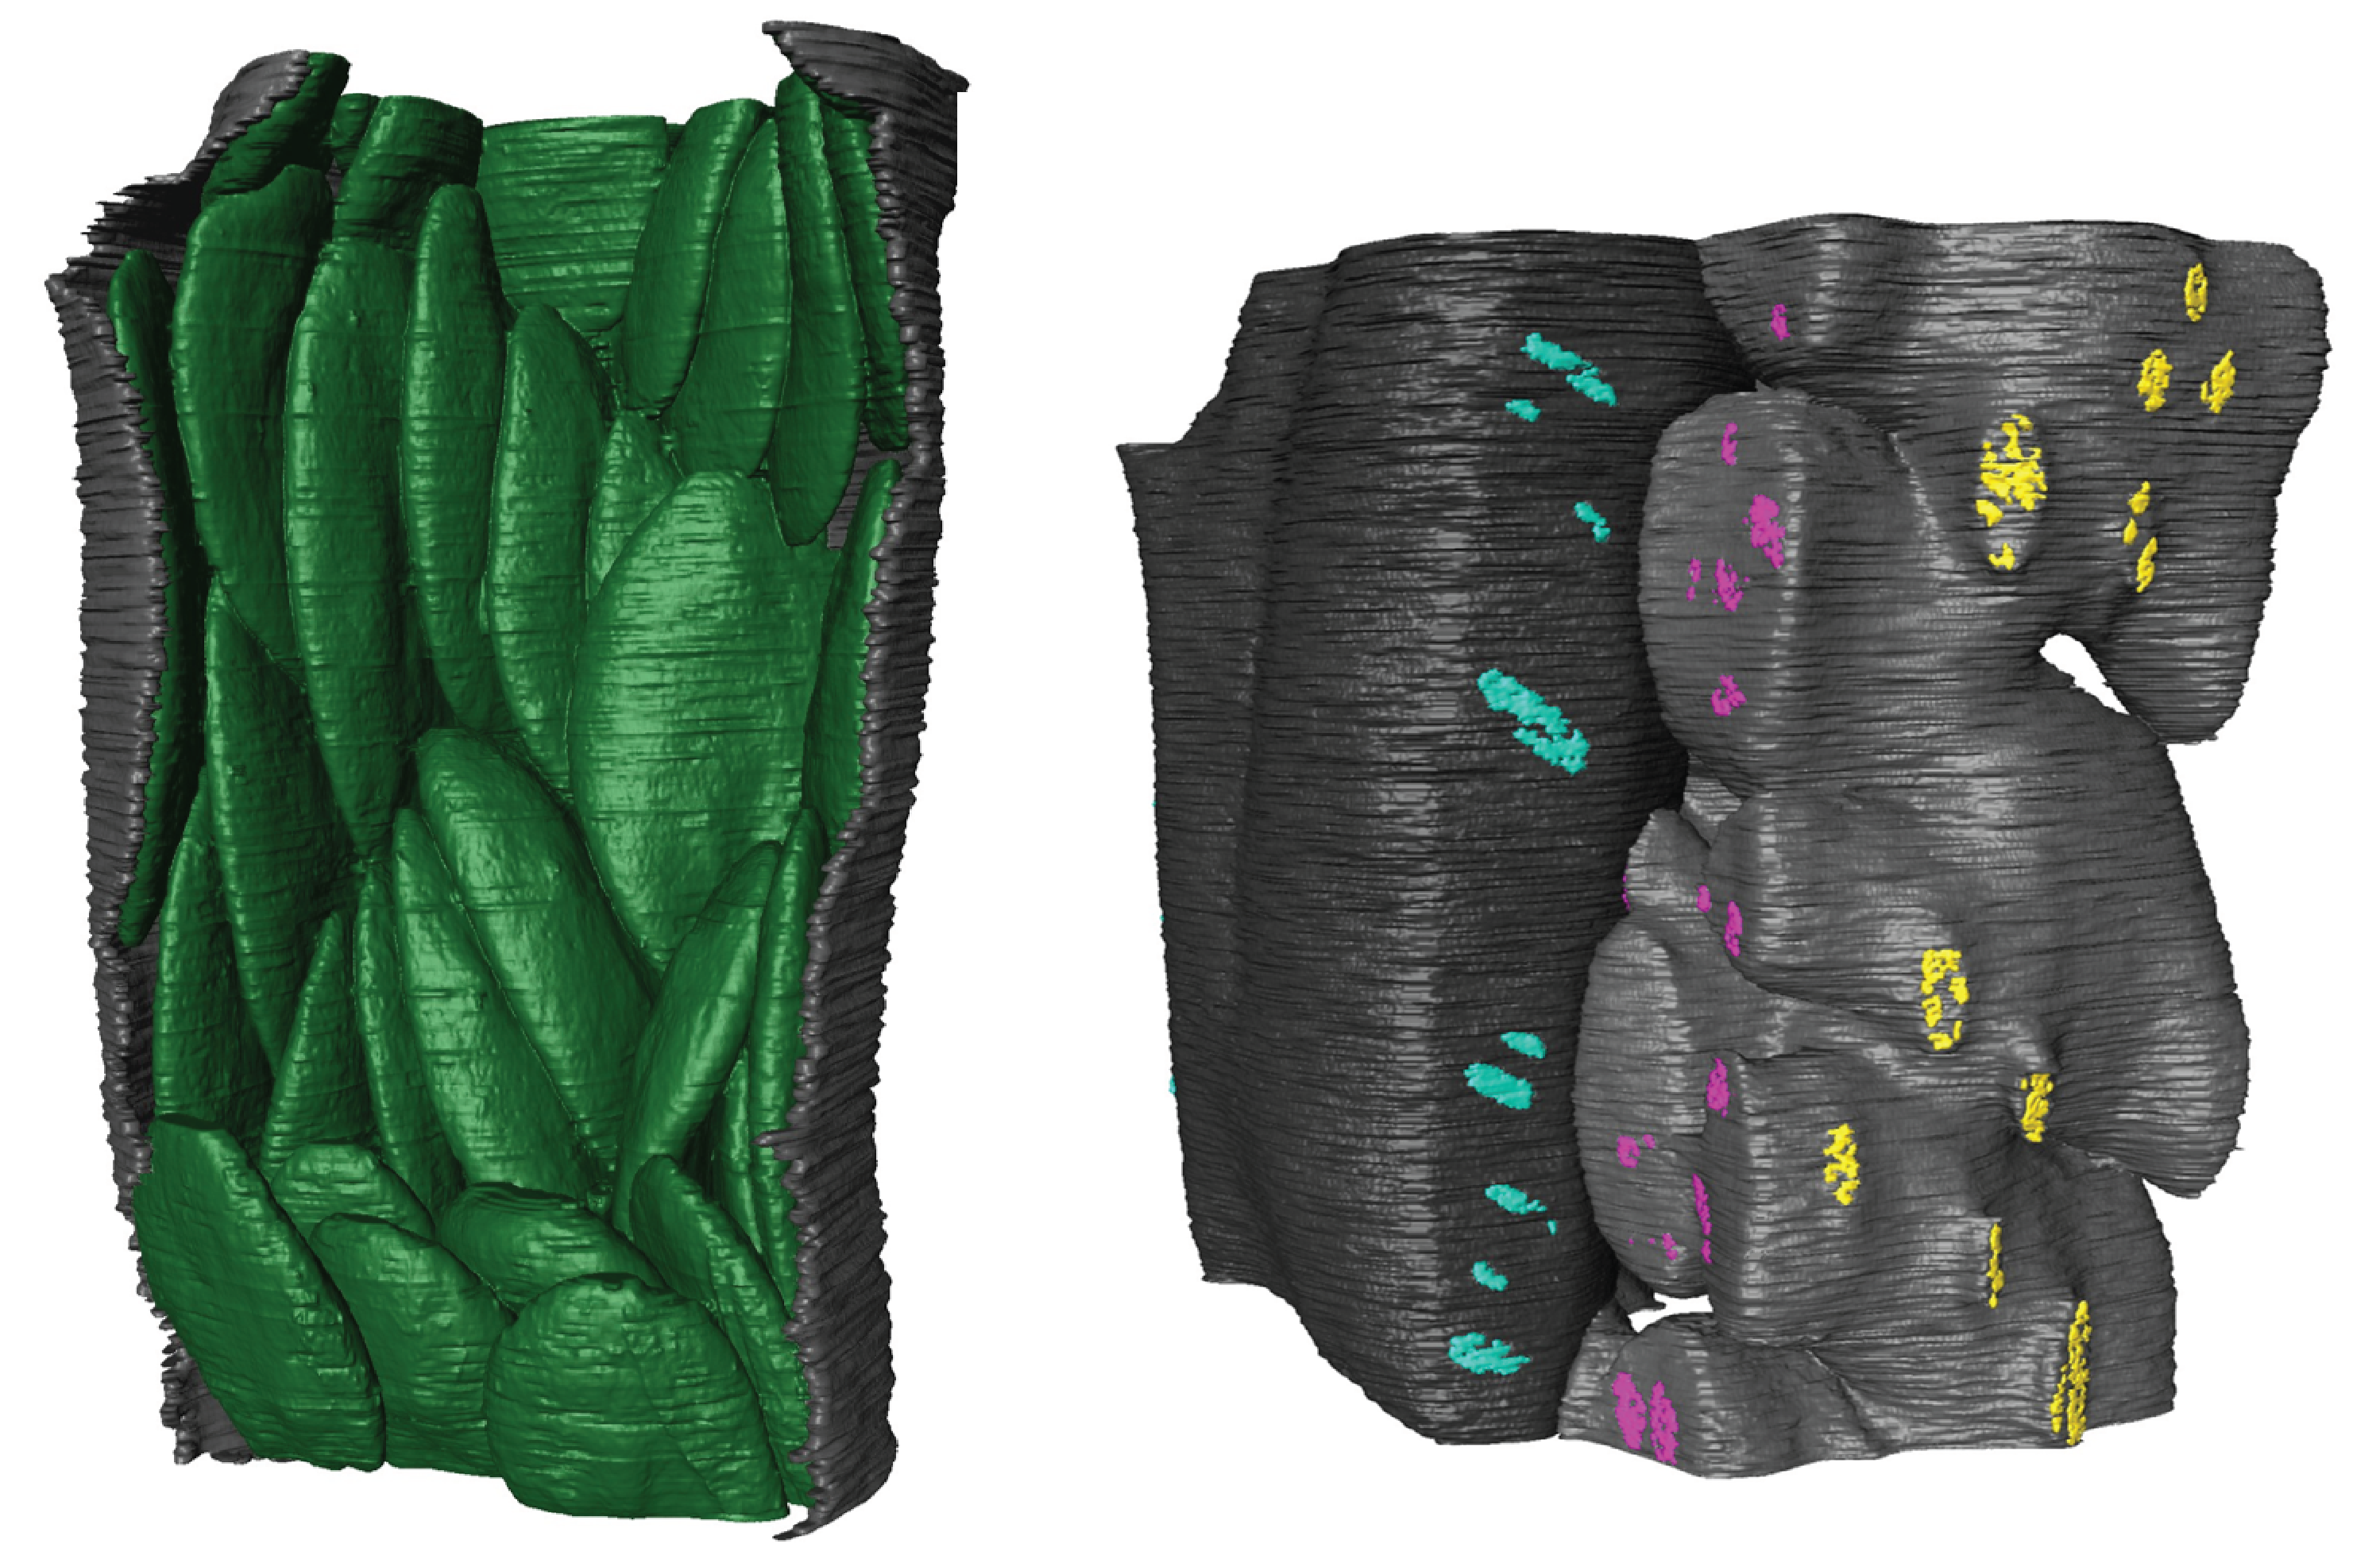 Exploring 3D leaf anatomical traits for C4 photosynthesis: chloroplast and plasmodesmata pit field size in maize and sugarcane. 